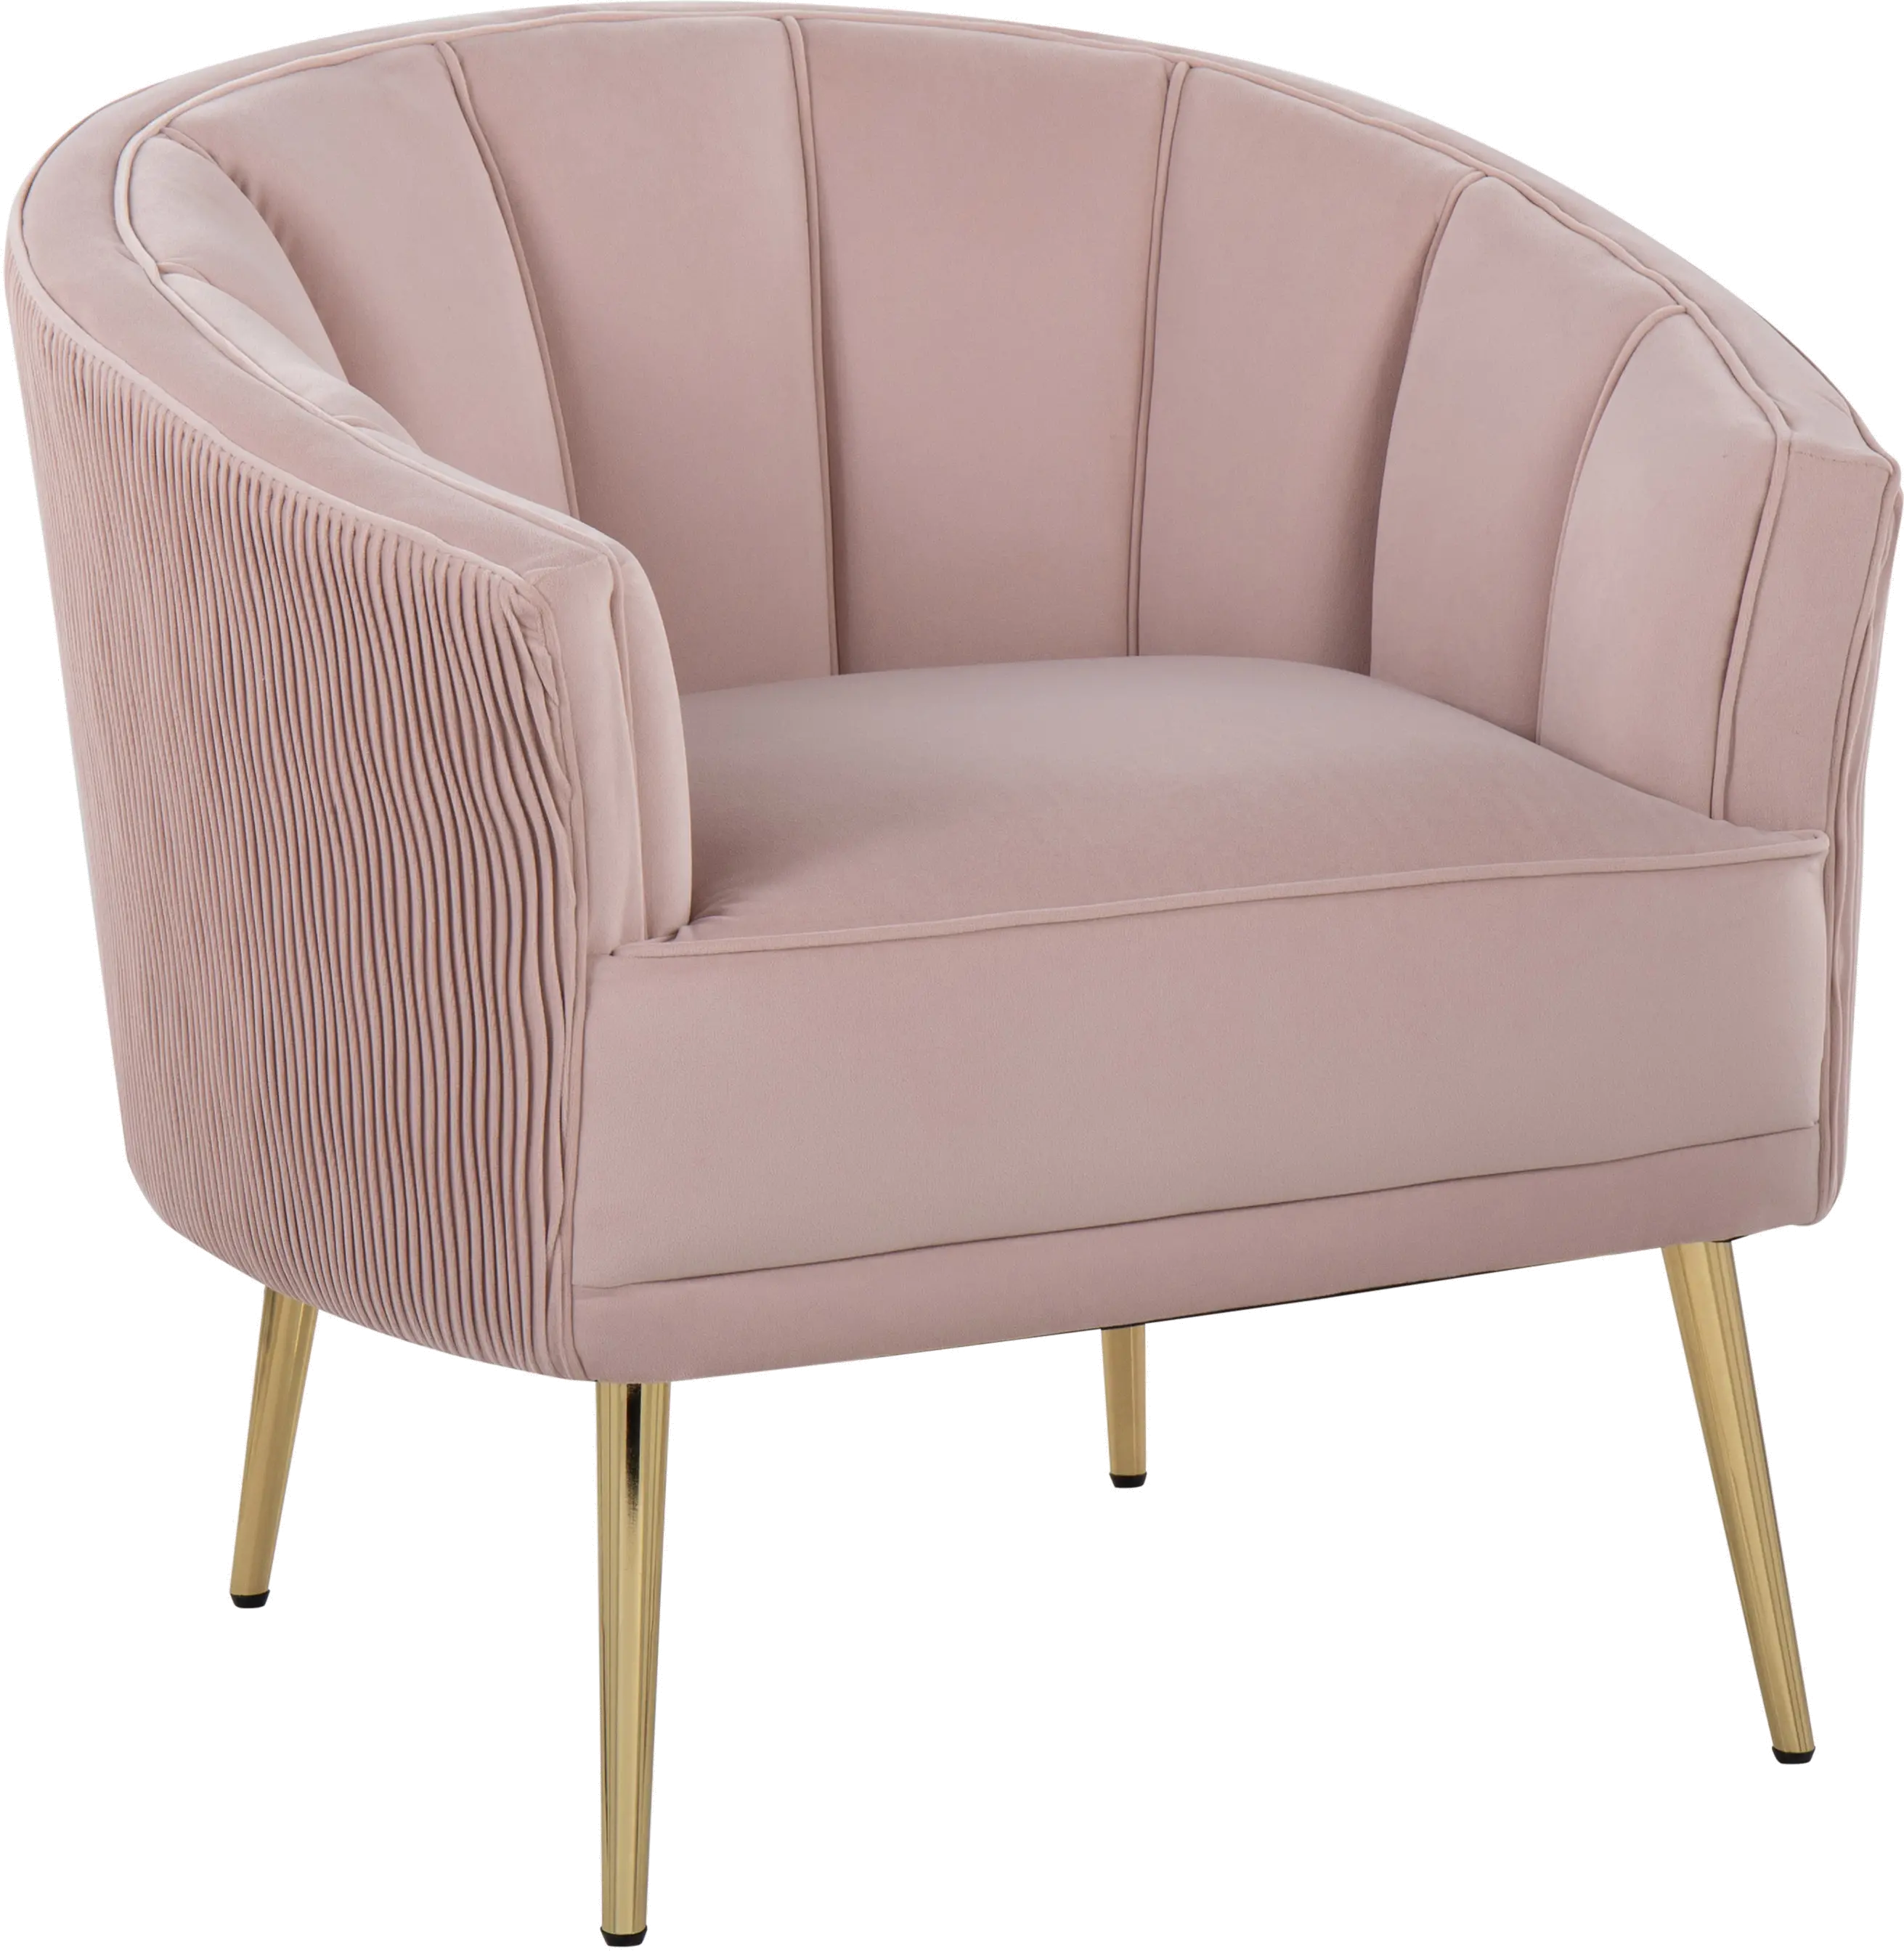 Tania Blush Pleated Waves Glam Accent Chair